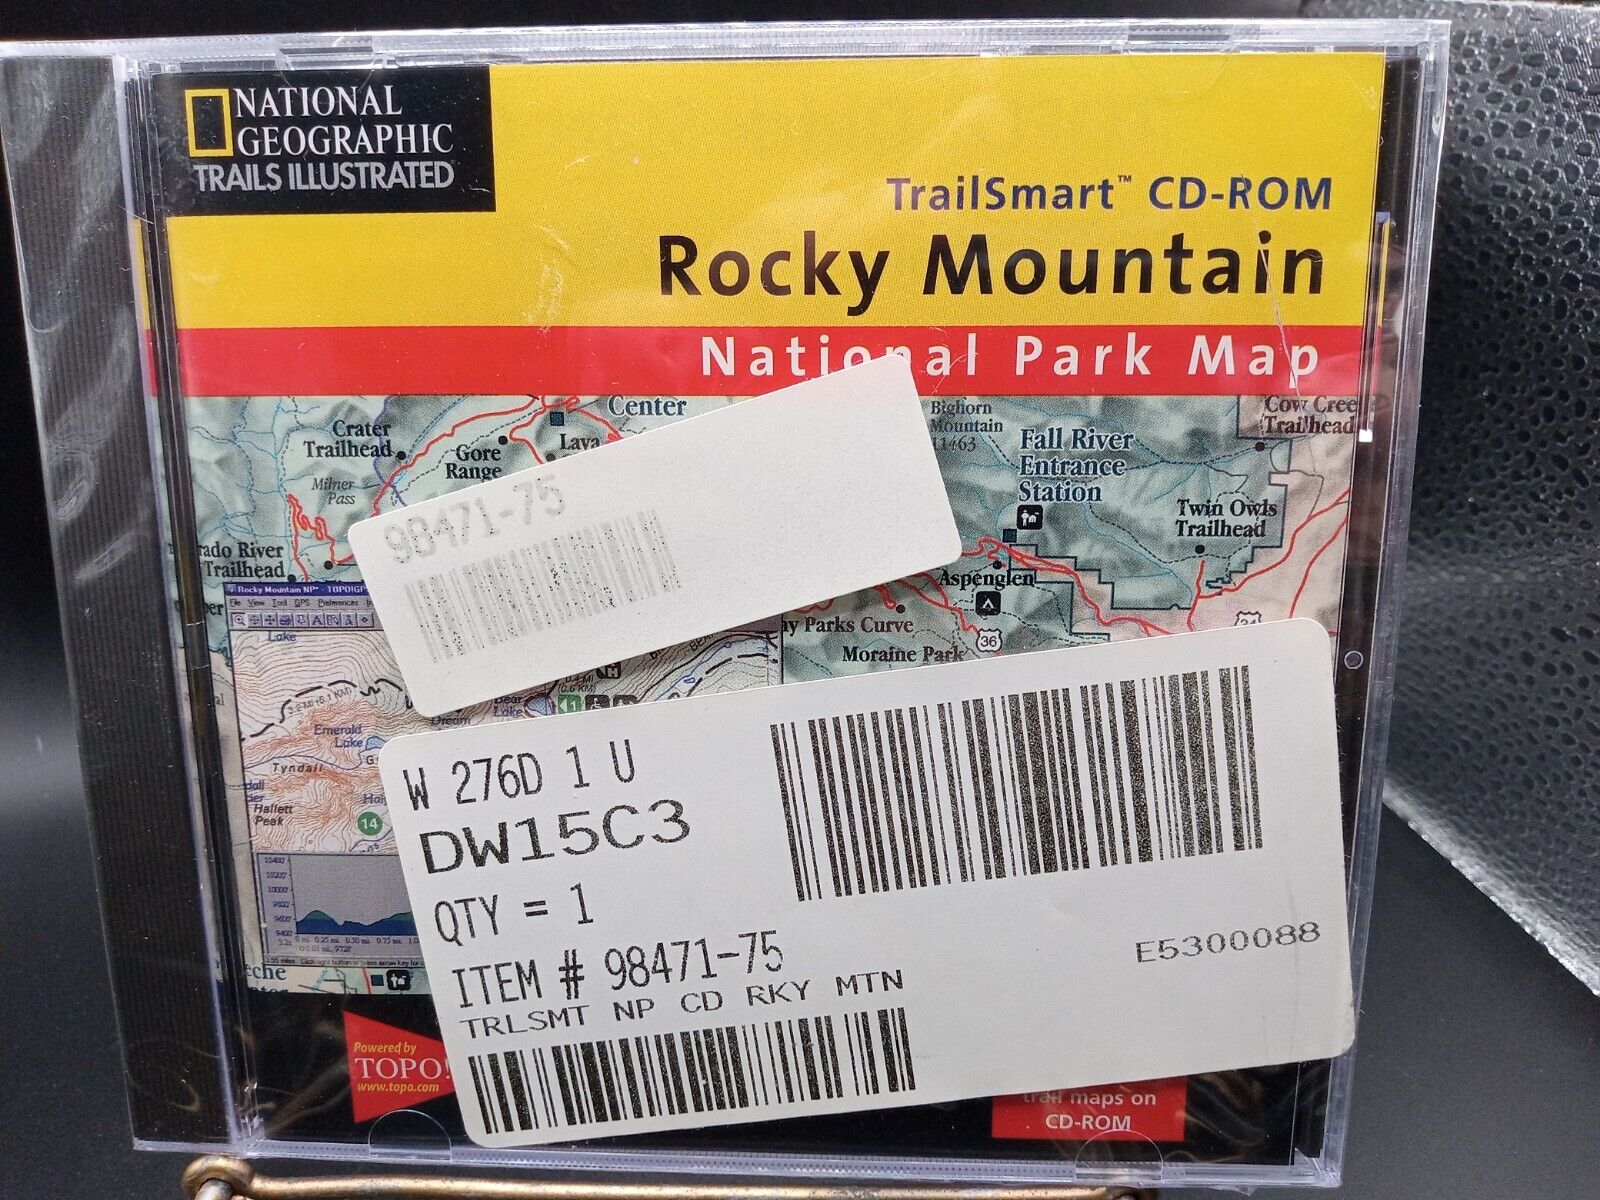 National Geographic Trailsmart CD-ROM Topo Rocky Mountain National Park MAP 2000